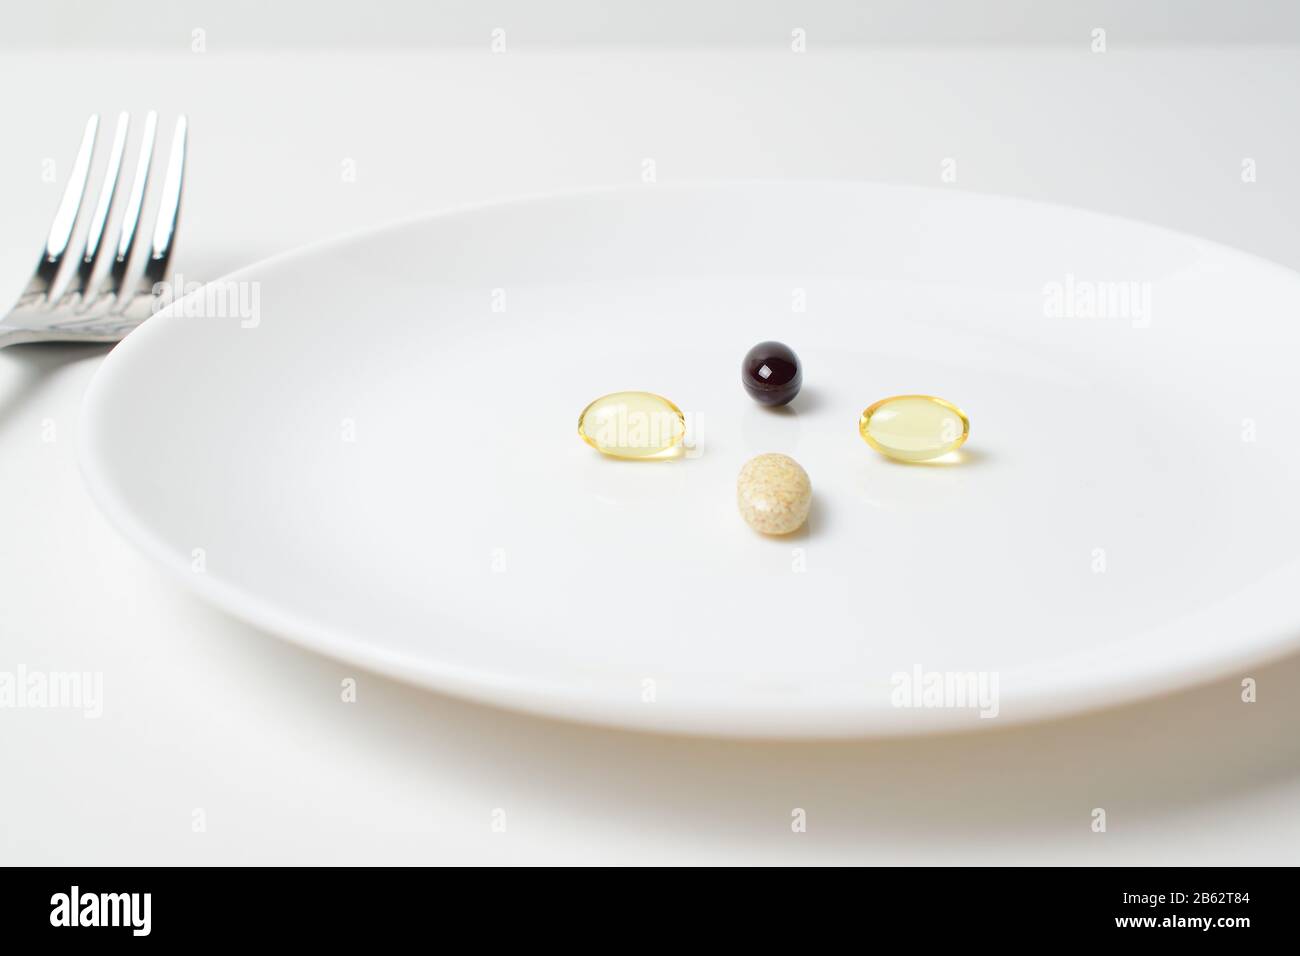 Multivitamin and mineral supplements. Plate with tablets. Meal replacement. Stock Photo